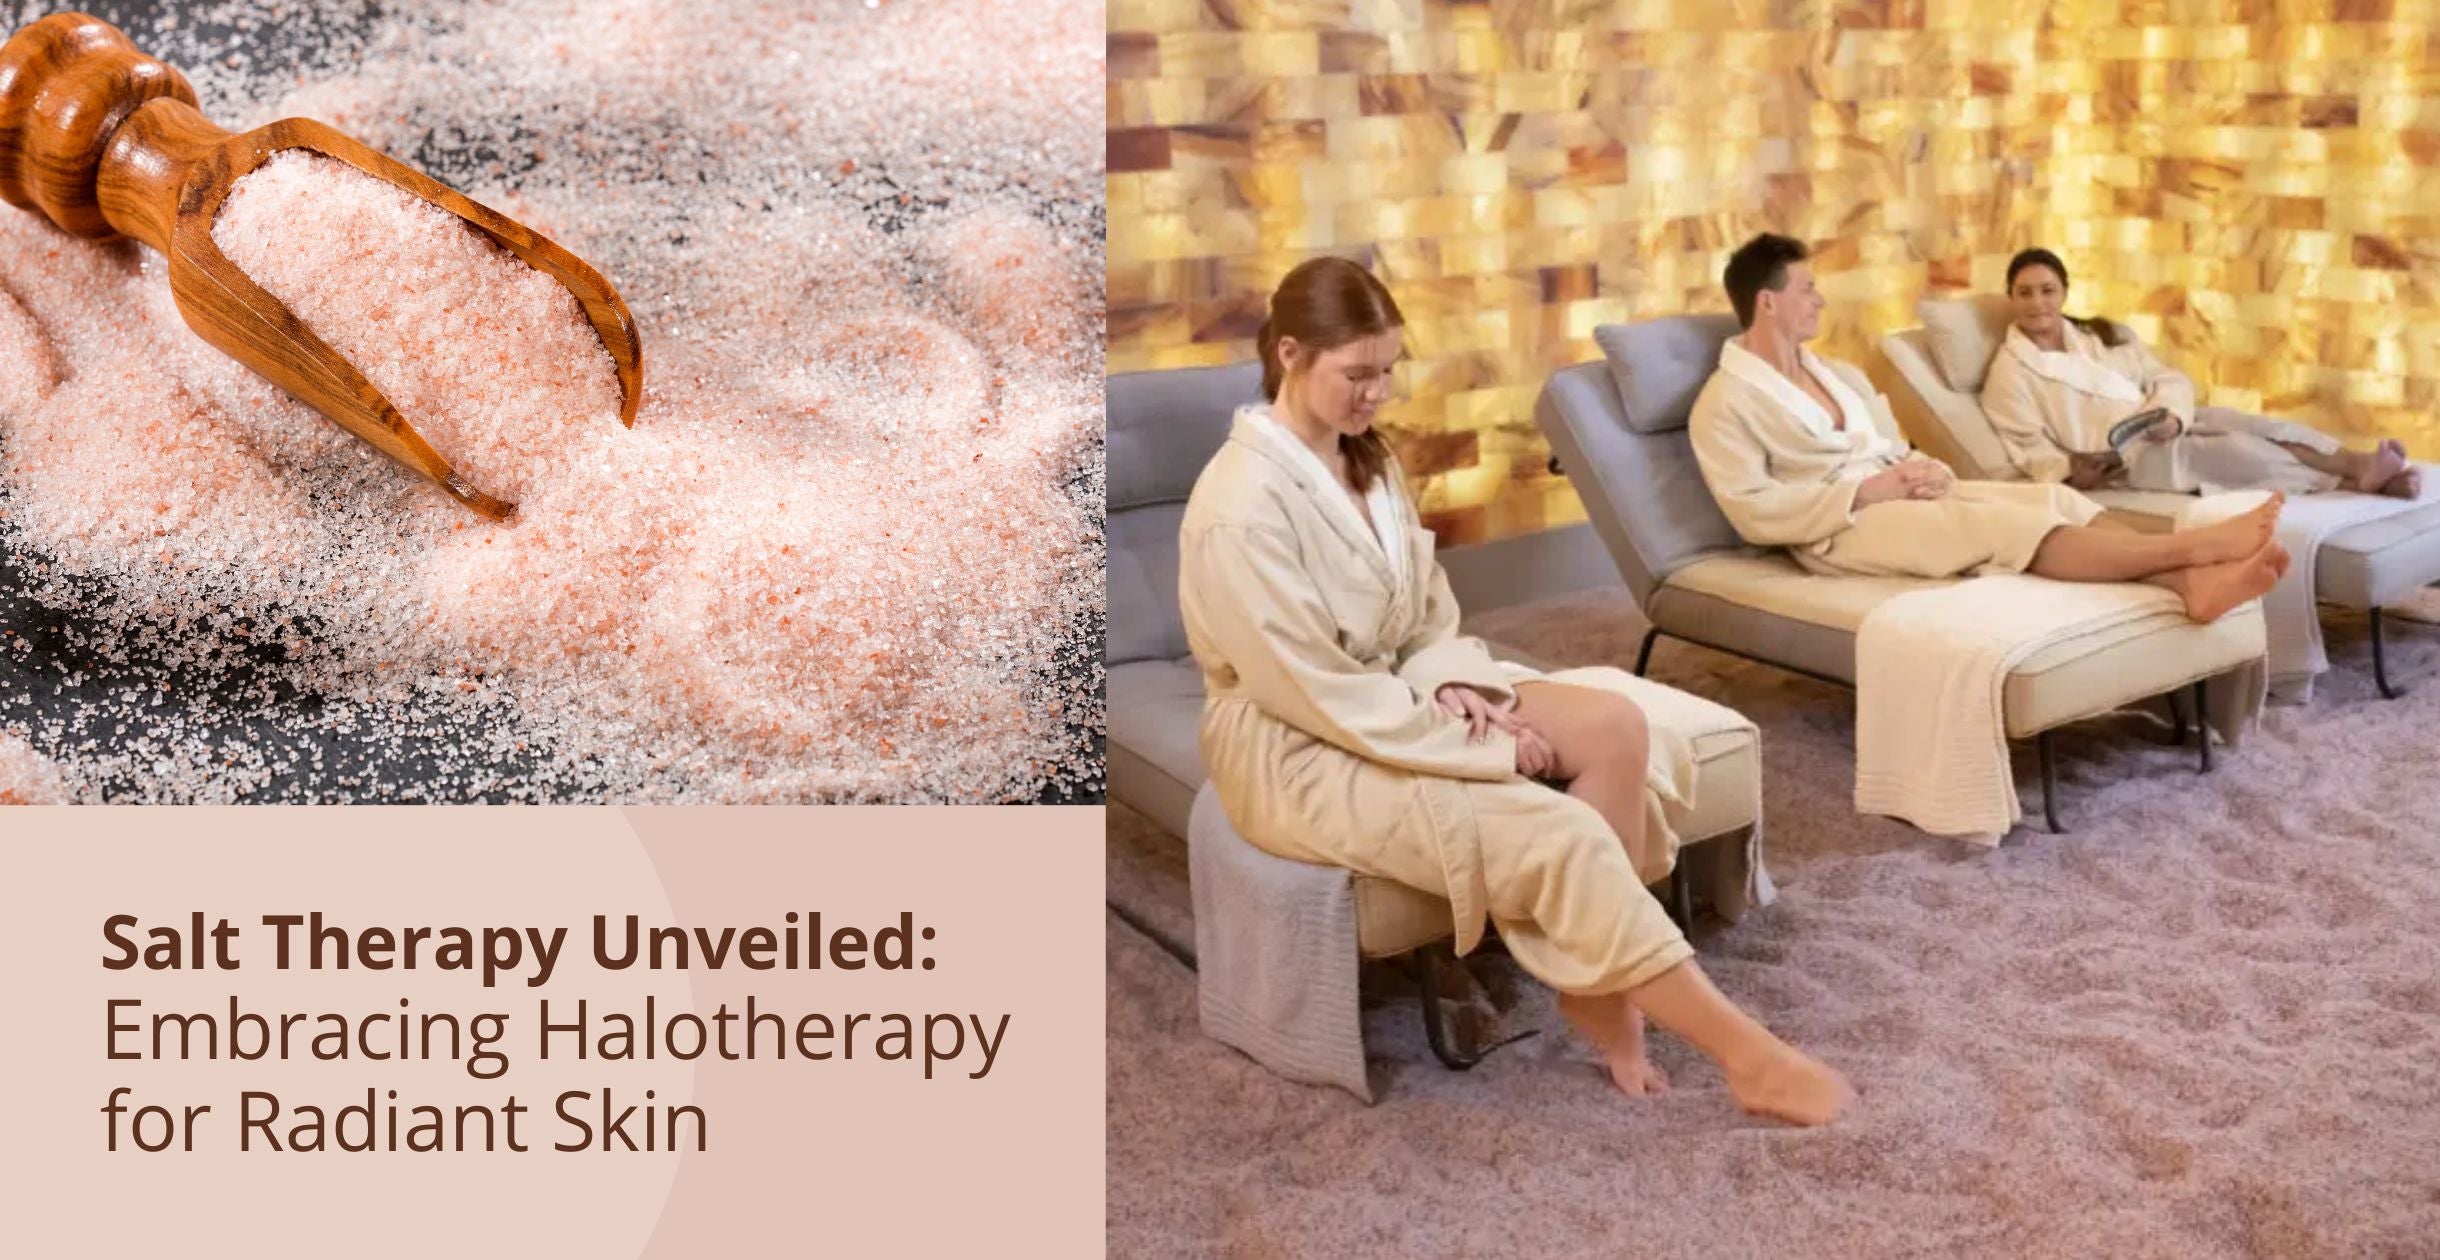 Salt Therapy Unveiled: Embracing Halotherapy for Radiant Skin